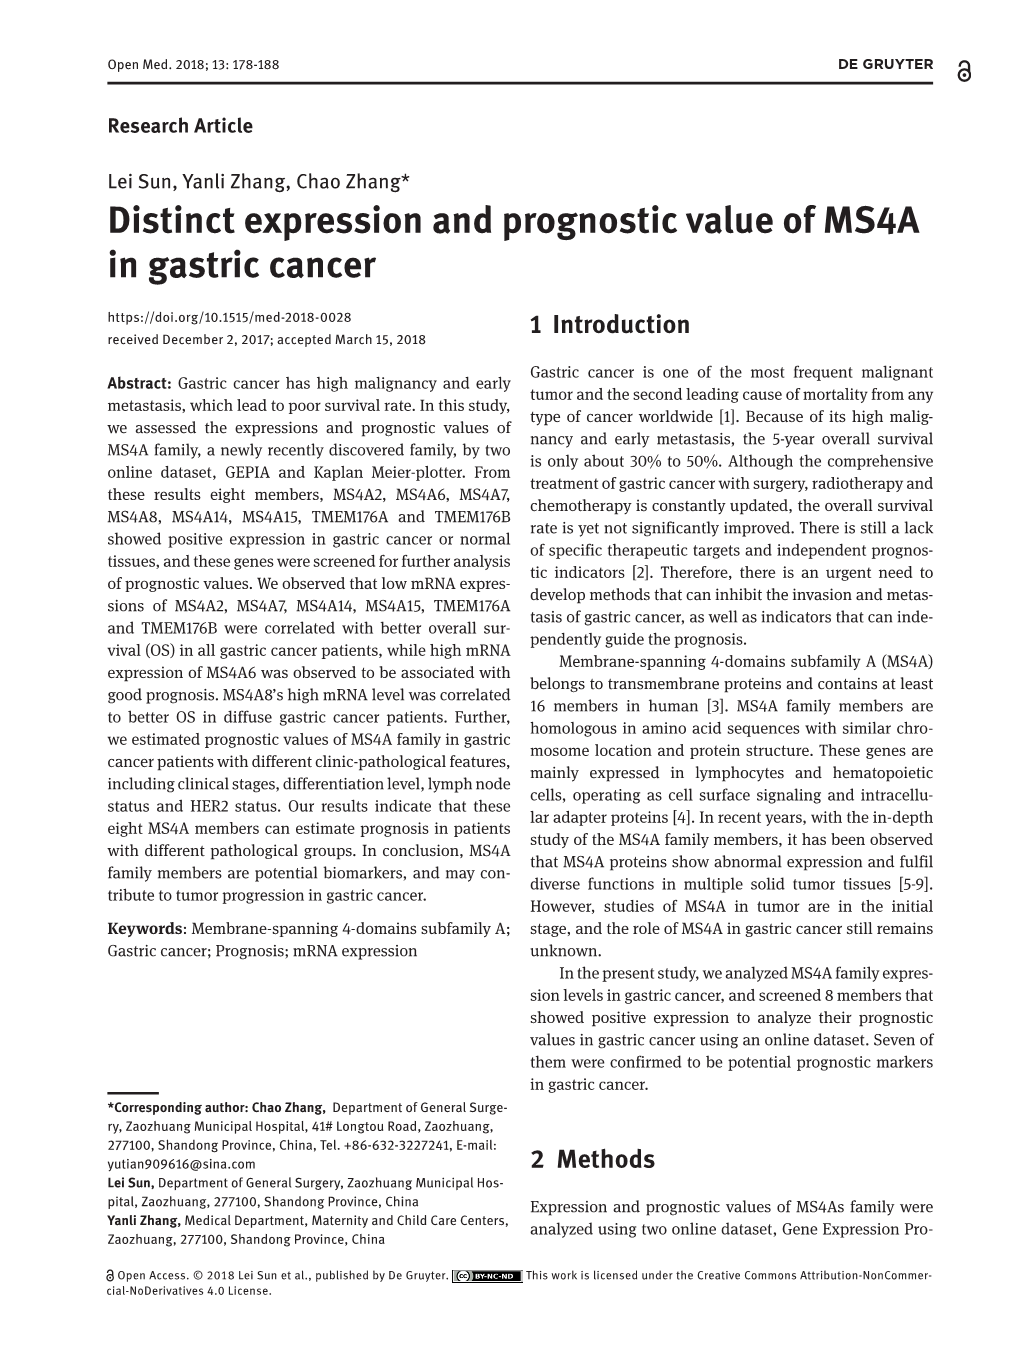 Distinct Expression and Prognostic Value of MS4A in Gastric Cancer